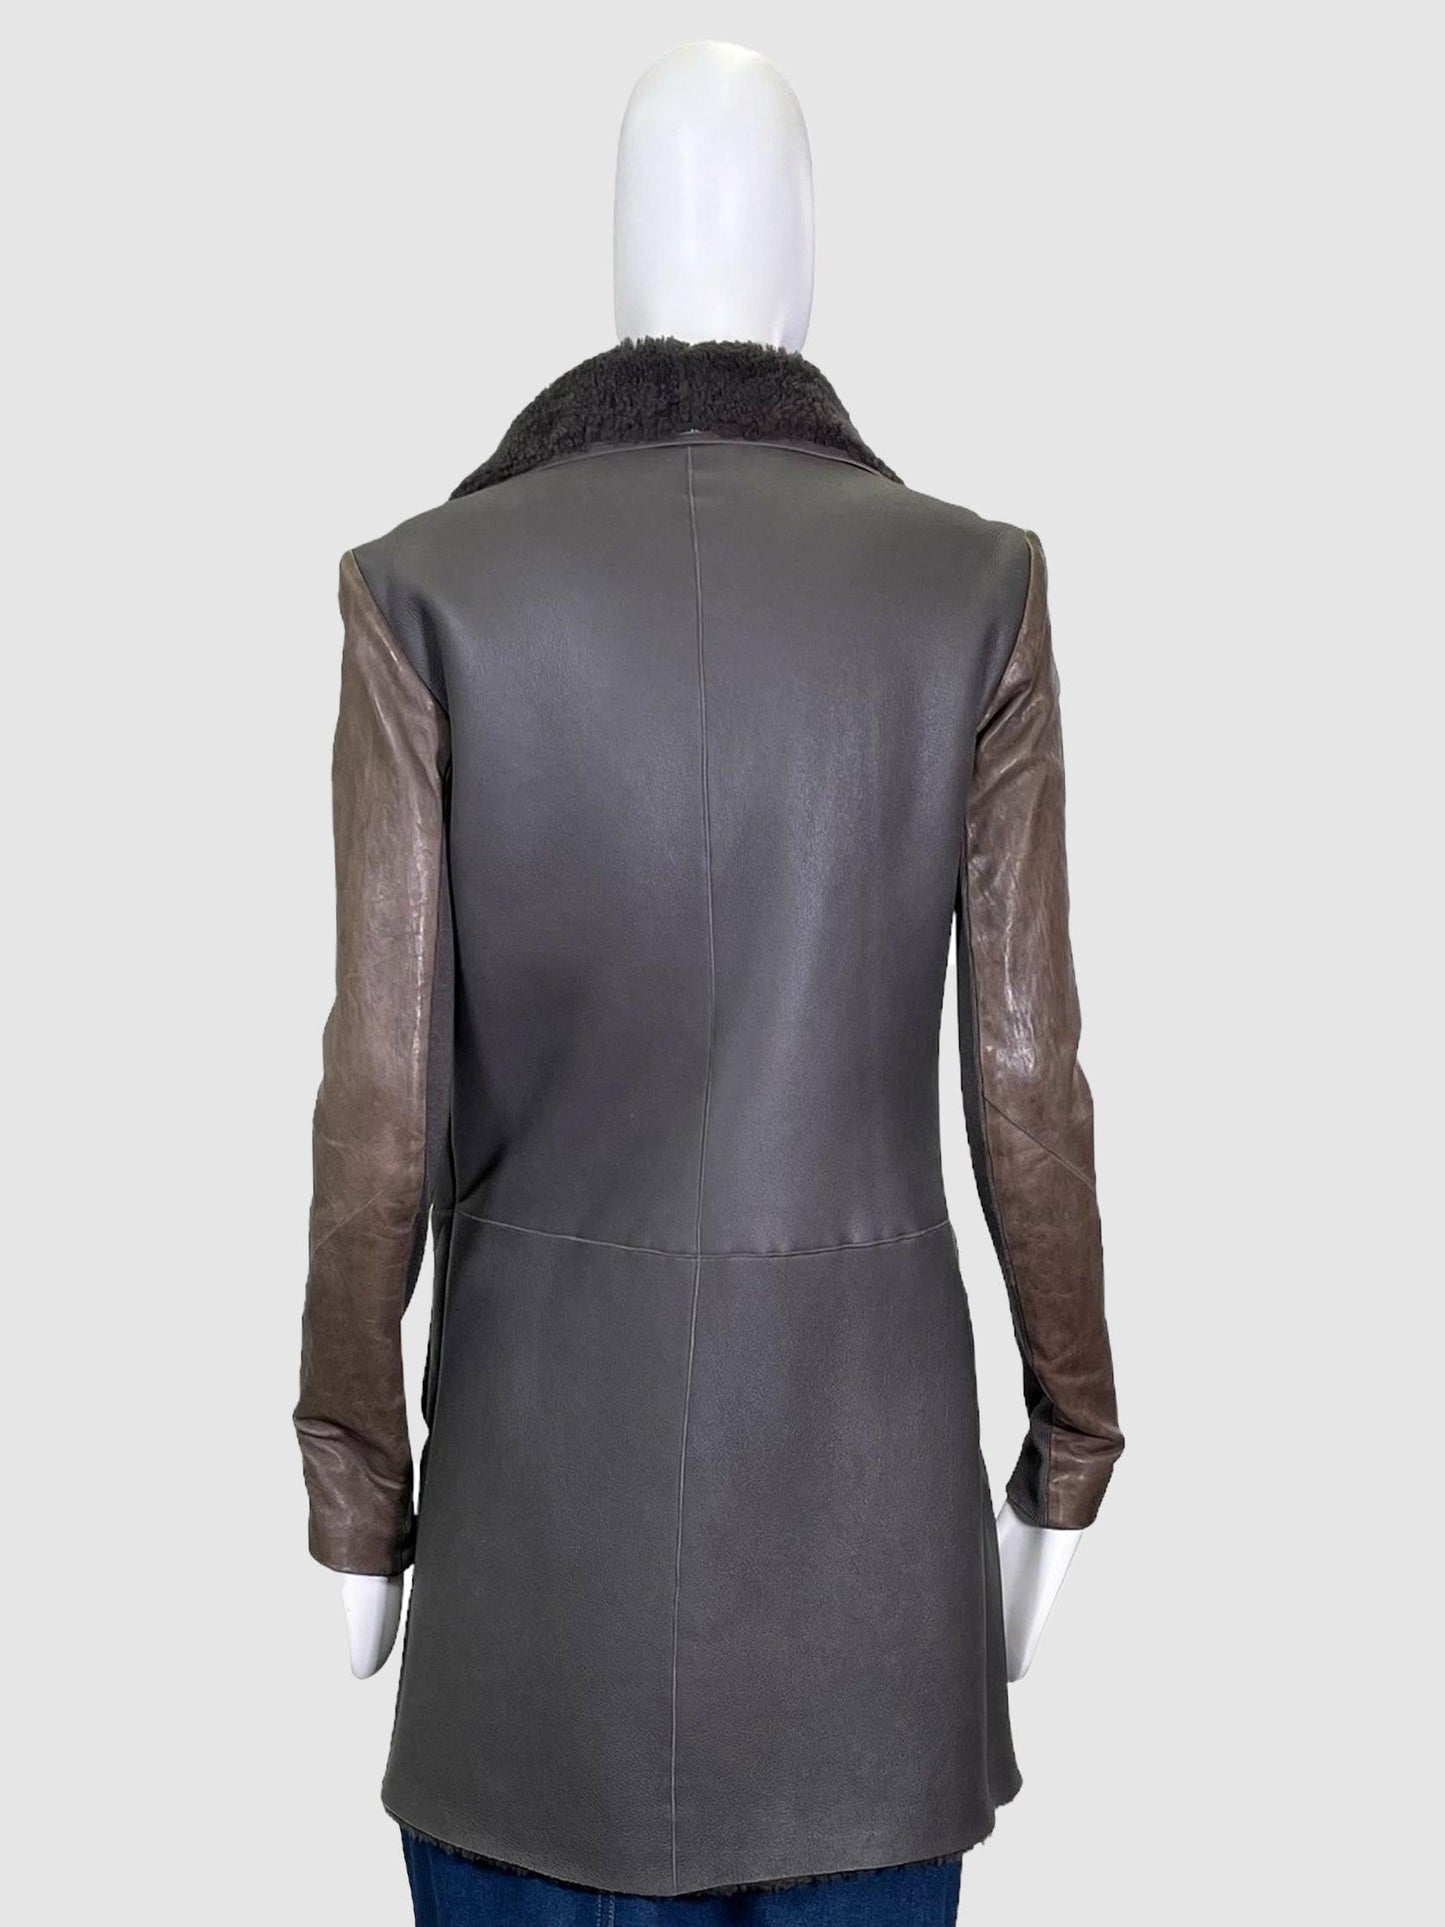 Rick Owens Shearling Jacket - Size 10 - Second Nature Boutique